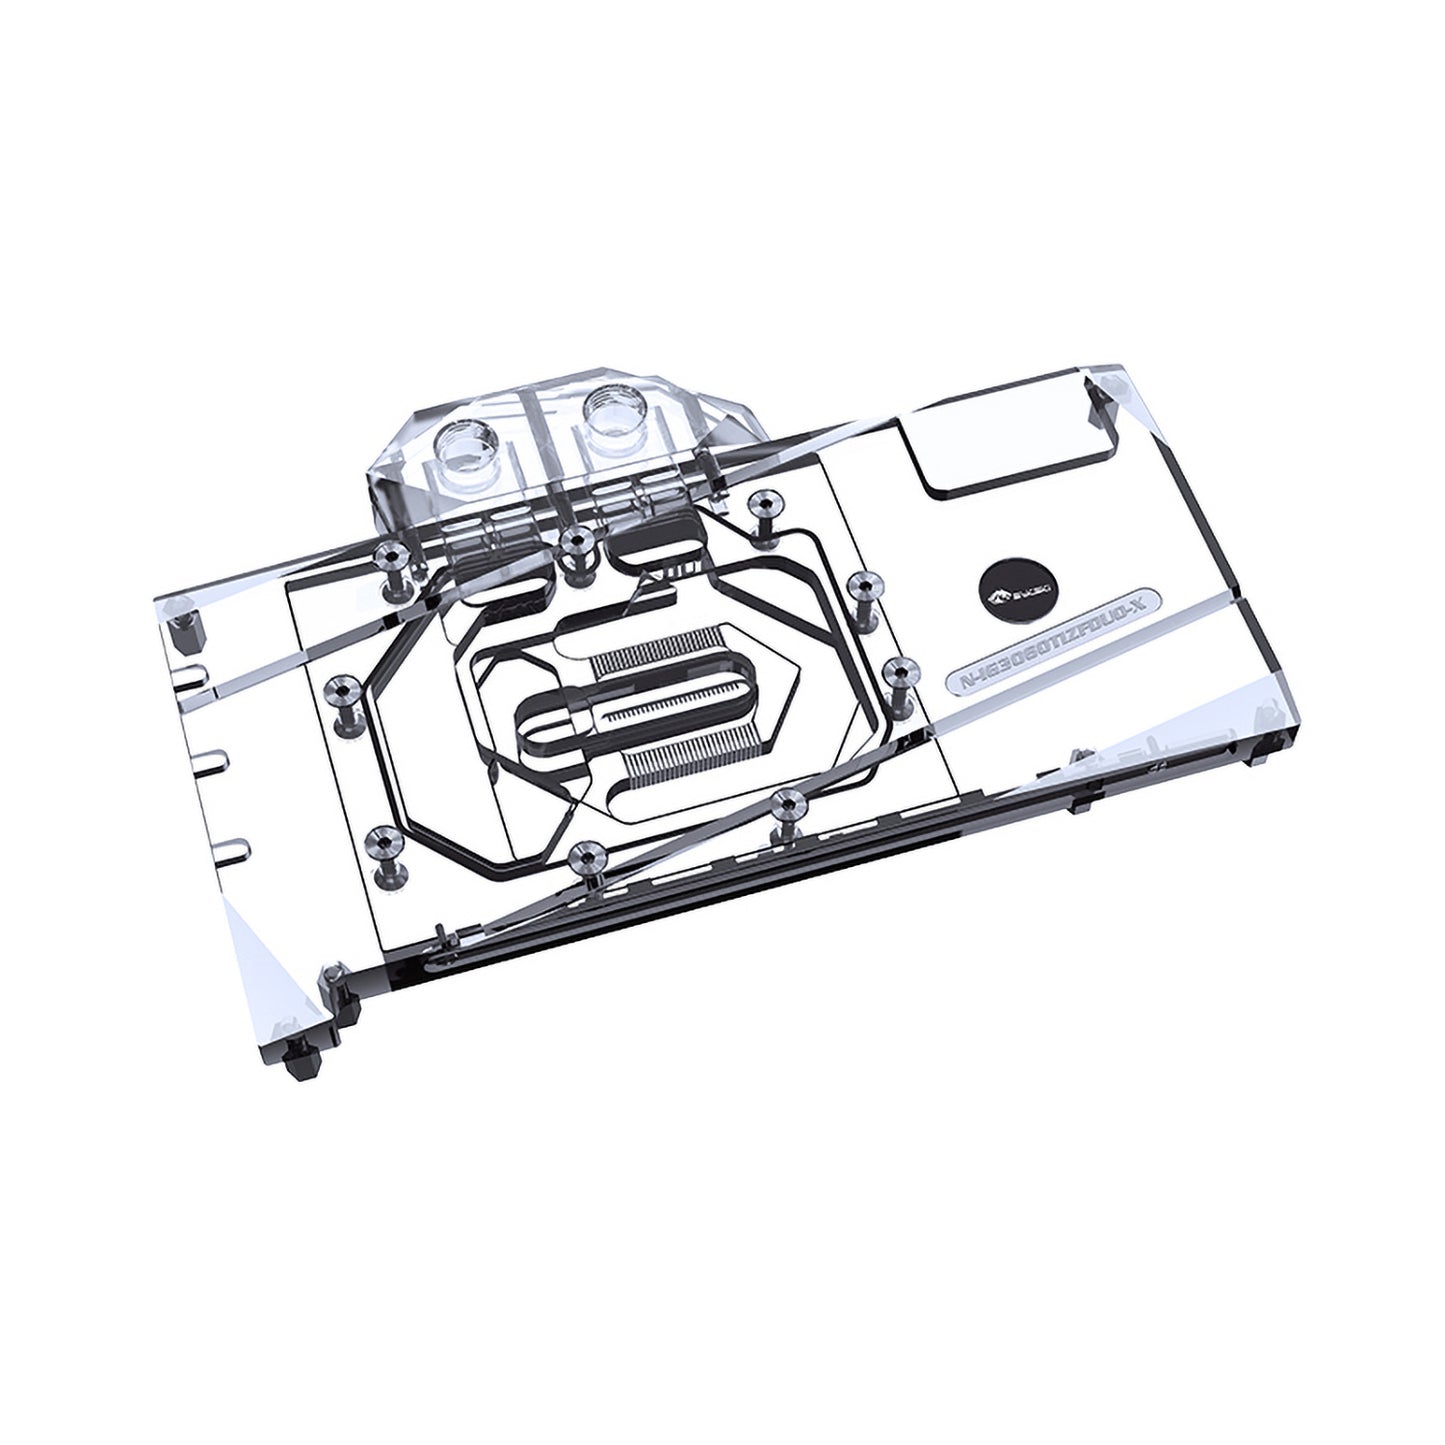 Bykski GPU Water Block For Colorful RTX 3060 Ti DUO G6X, Full Cover With Backplate PC Water Cooling Cooler, N-IG3060TIZFDUO-X